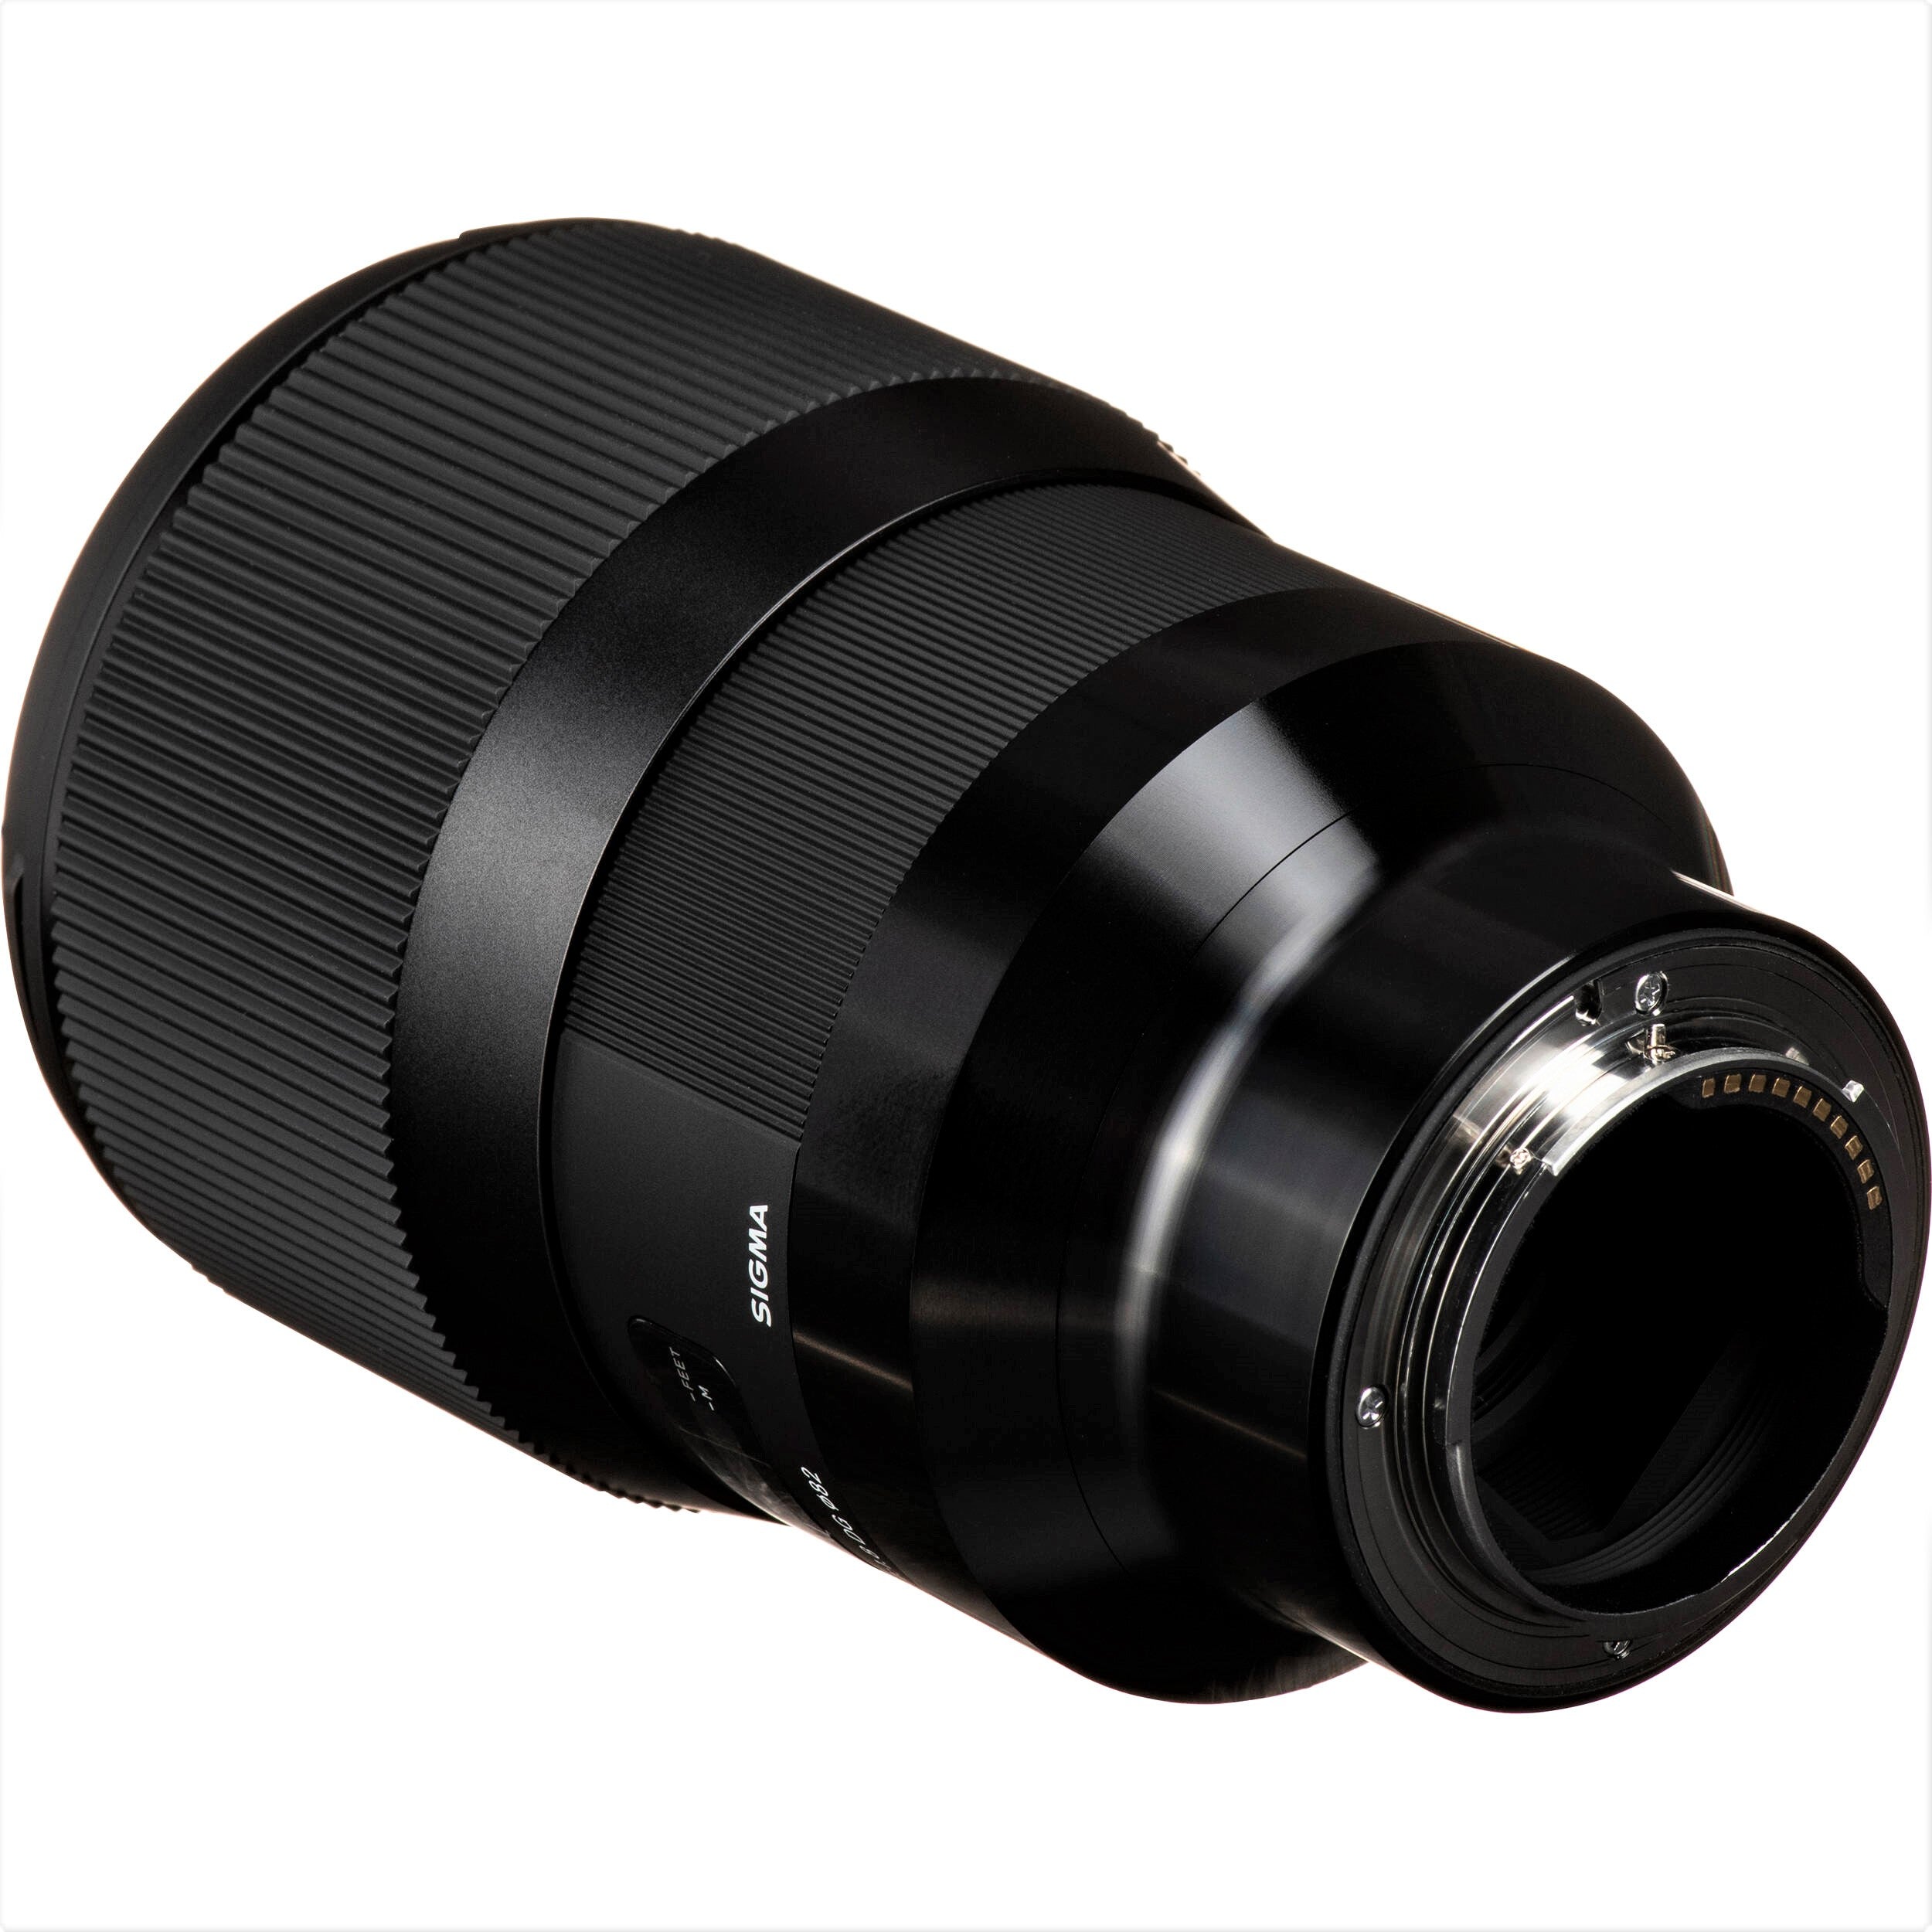 Sigma 135mm F1.8 DG HSM Art Lens for Sony E in a Back-Side View